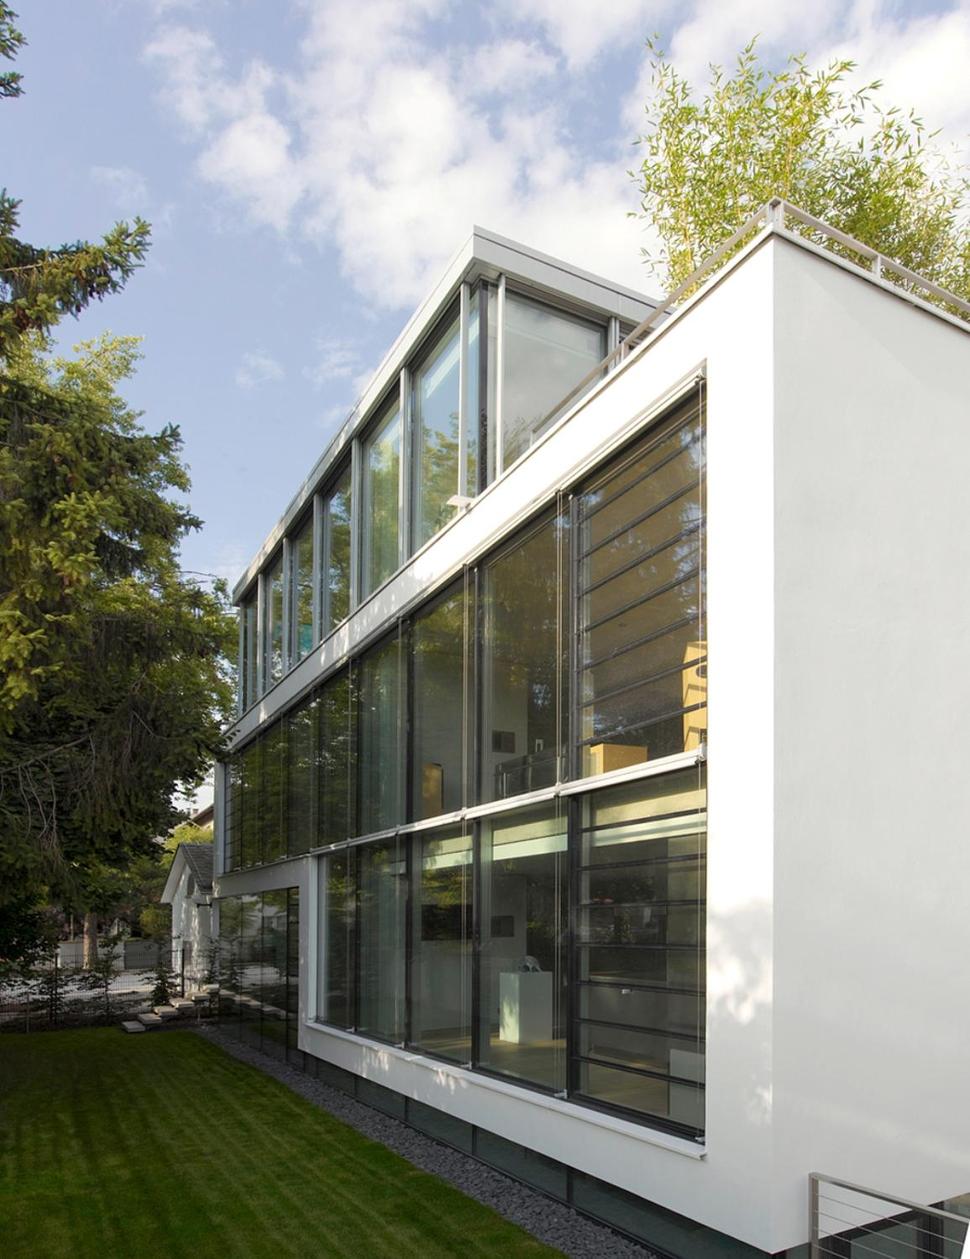 energy-optimized-house-with-roof-terrace-louver-windows-exterior-window-shatters-and-elevator-3.jpg